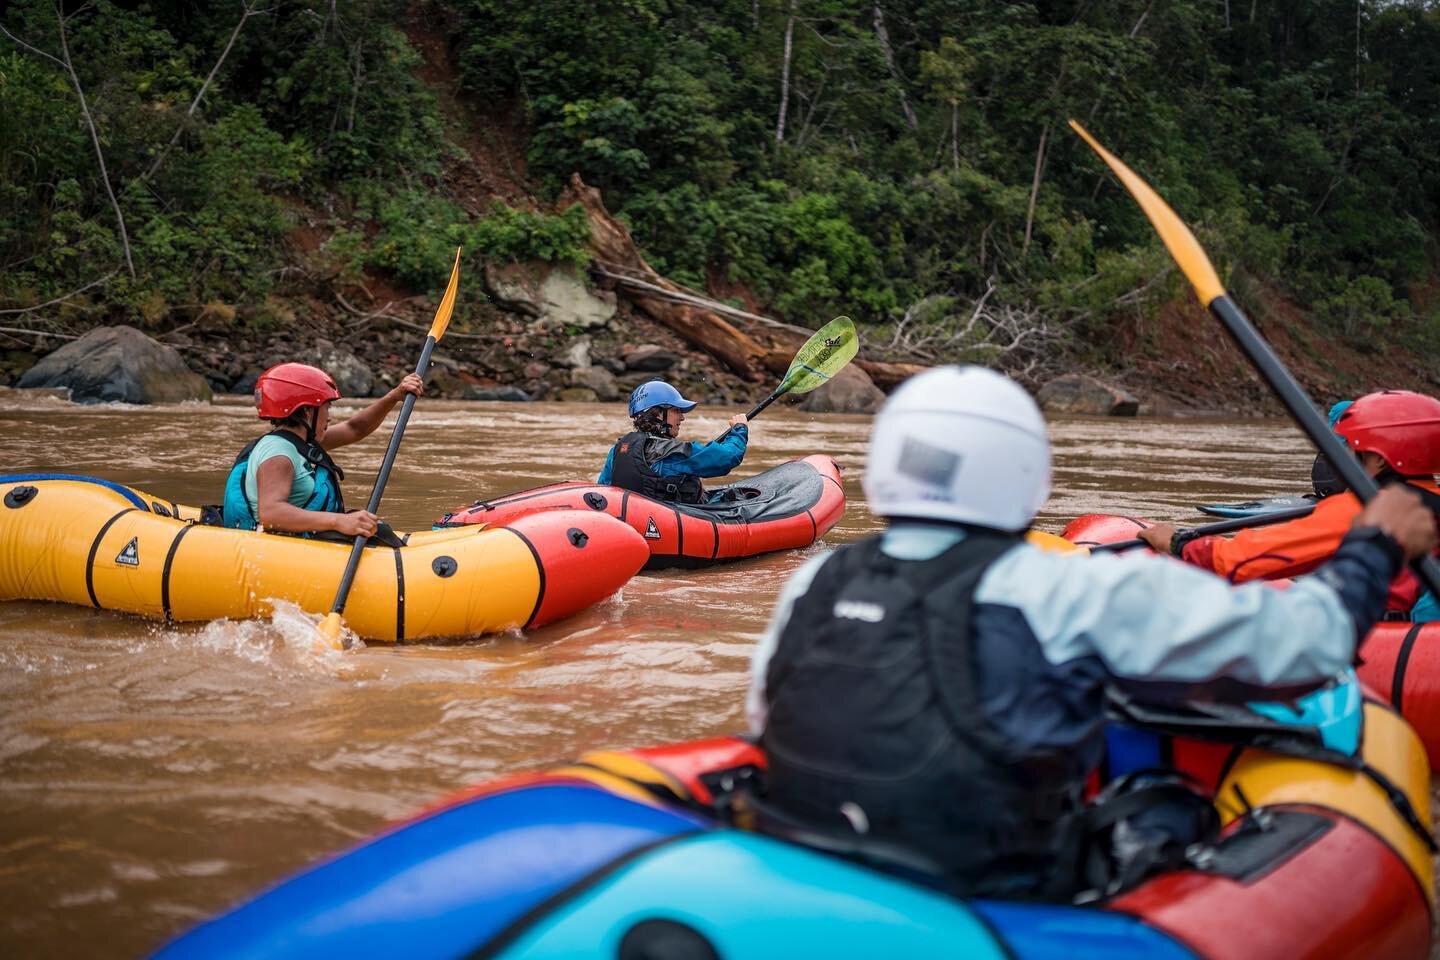 Keep an eye out for our new teaser for an upcoming short film on our Amazonian Rivers Program: &ldquo;Guardians of Rivers and Life&rdquo;, about how whitewater kayaking and cultural exchange are becoming tools to protect the Amazon, her tributaries, 